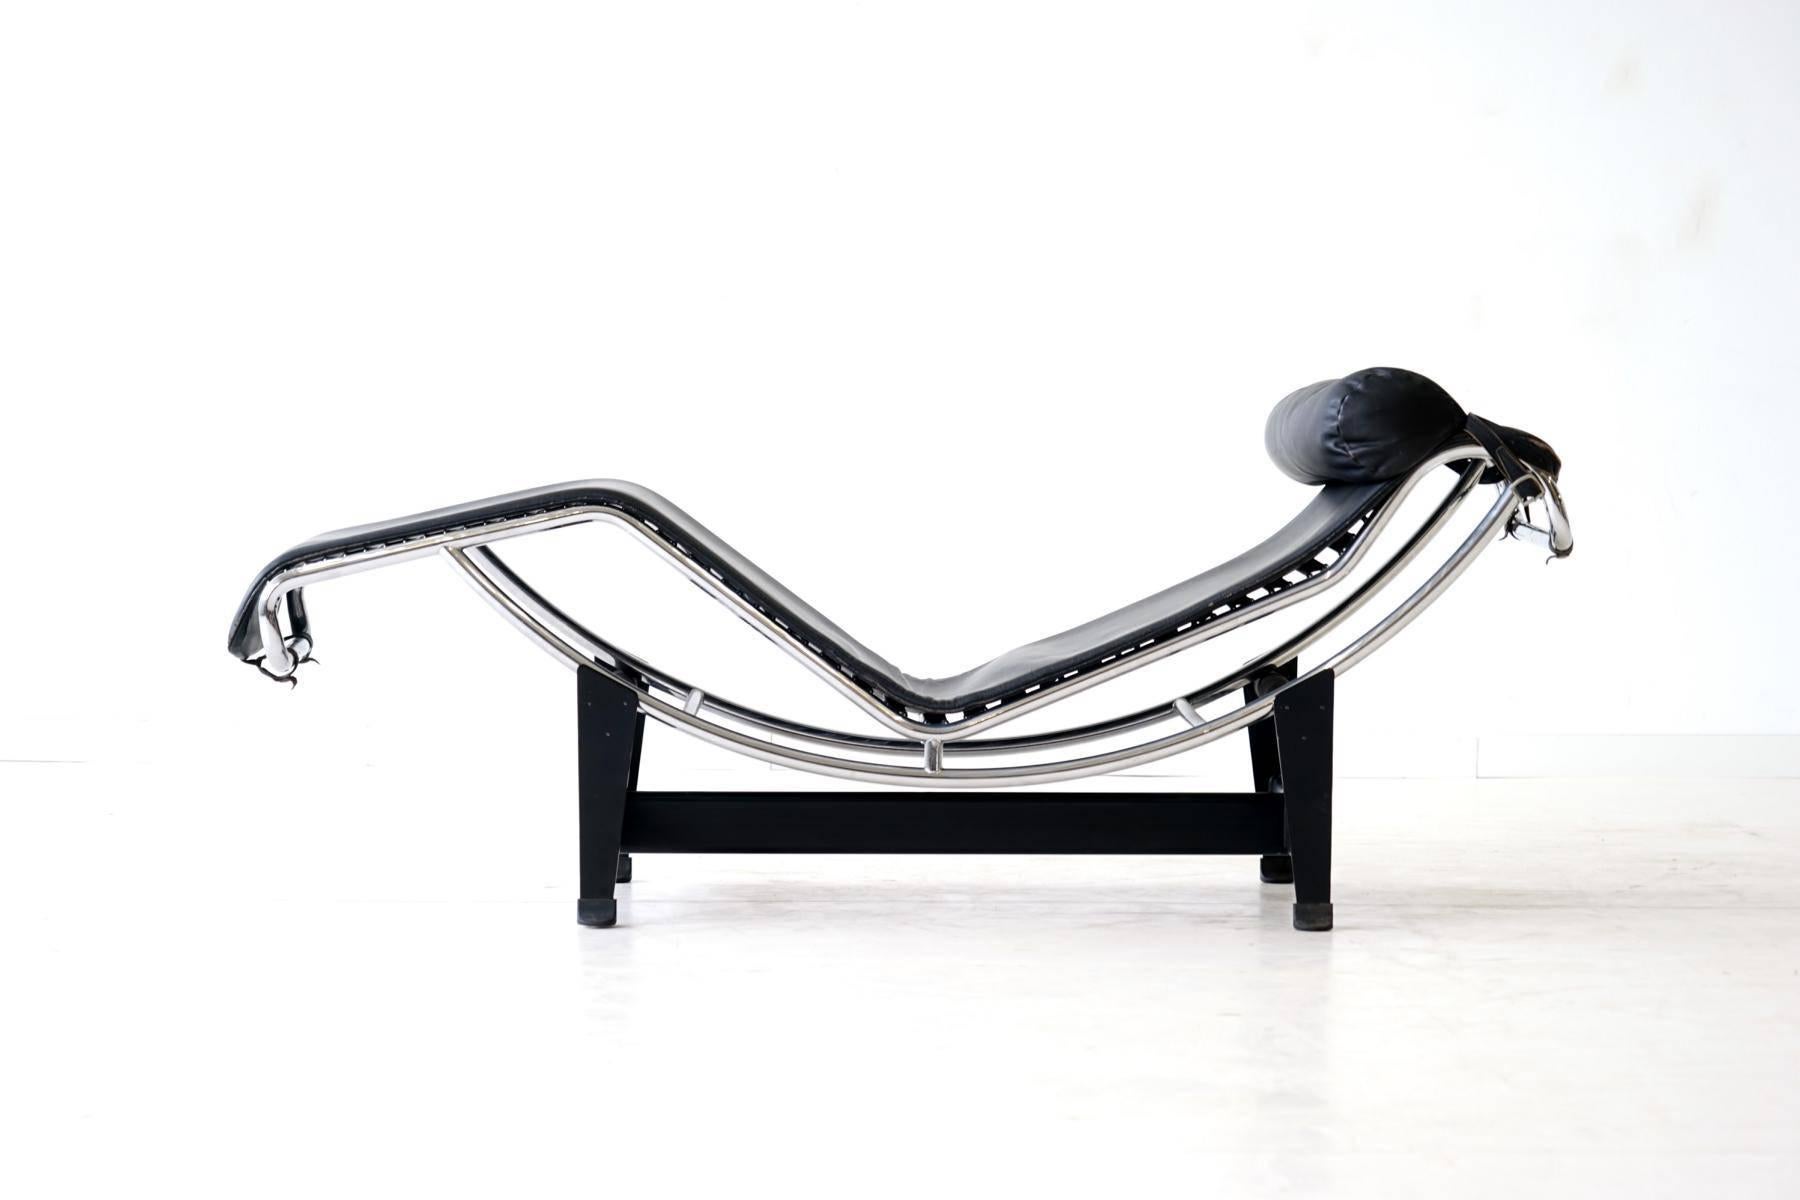 Early LC4 Le Corbusier Chaise Longue Cassina No. 8XXX
Le Corbusier LC4 chaise longue for Cassina with adjustable polished chrome-plated steel frame and innovative self-supporting mattress, covered in original black leather. This LC4 comes from an